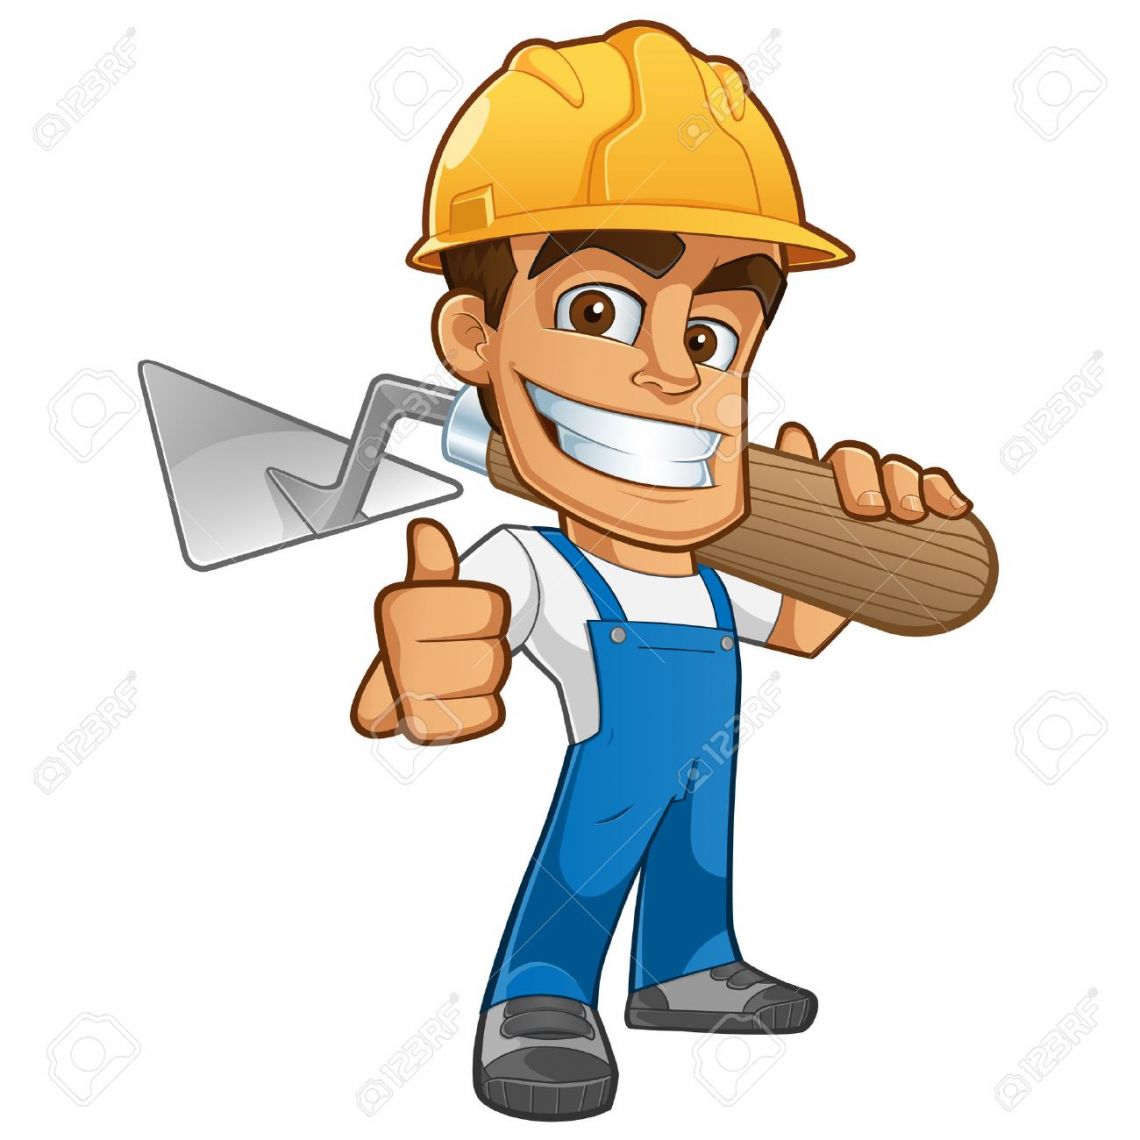 44058528 sympathetic bricklayer dressed in work clothes he wears a helmet and trowel